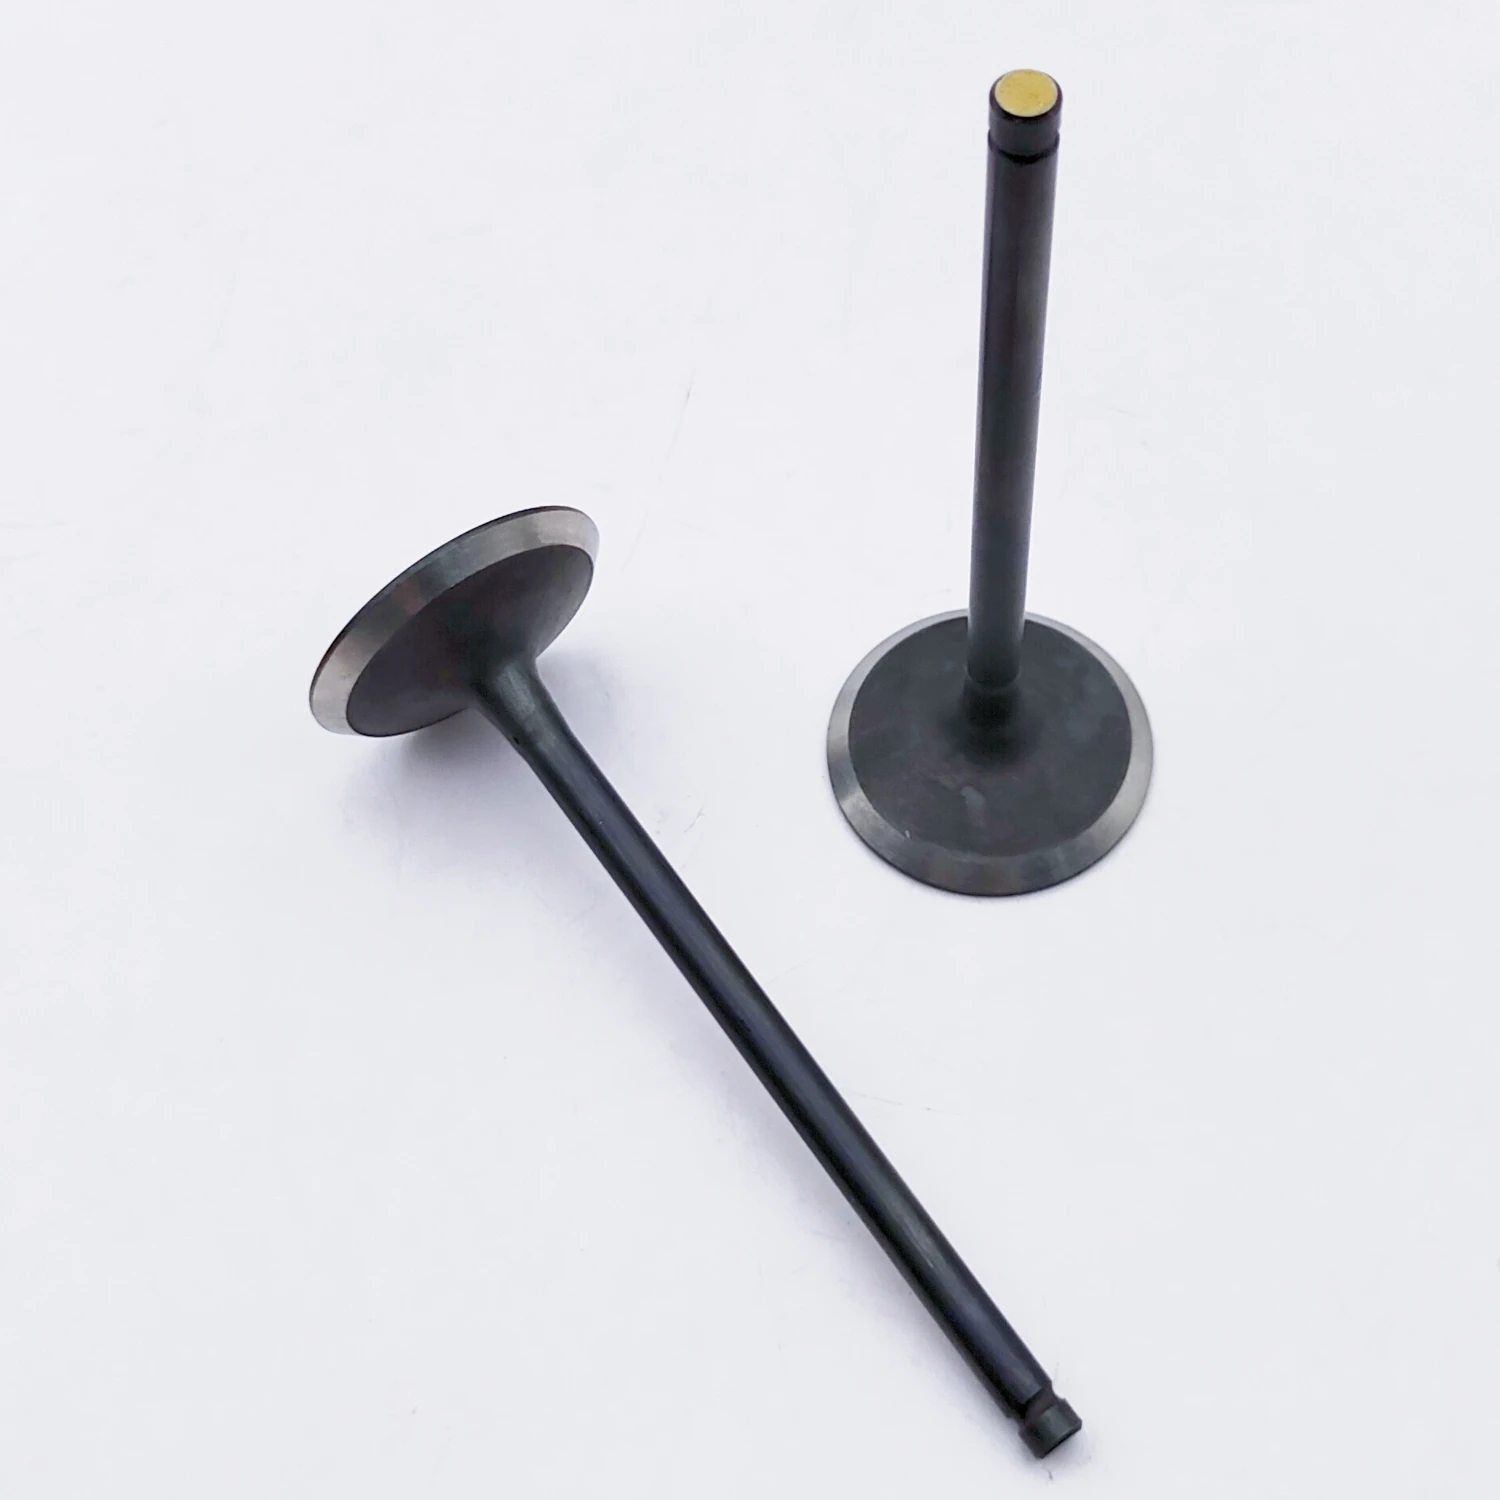 Intake Exhaust Valve for Can-Am Traxter HD8 HD9 HD10 Ski-Doo Expedition V800 Skandic V800 Renegade 900 1200 420254359 420254368